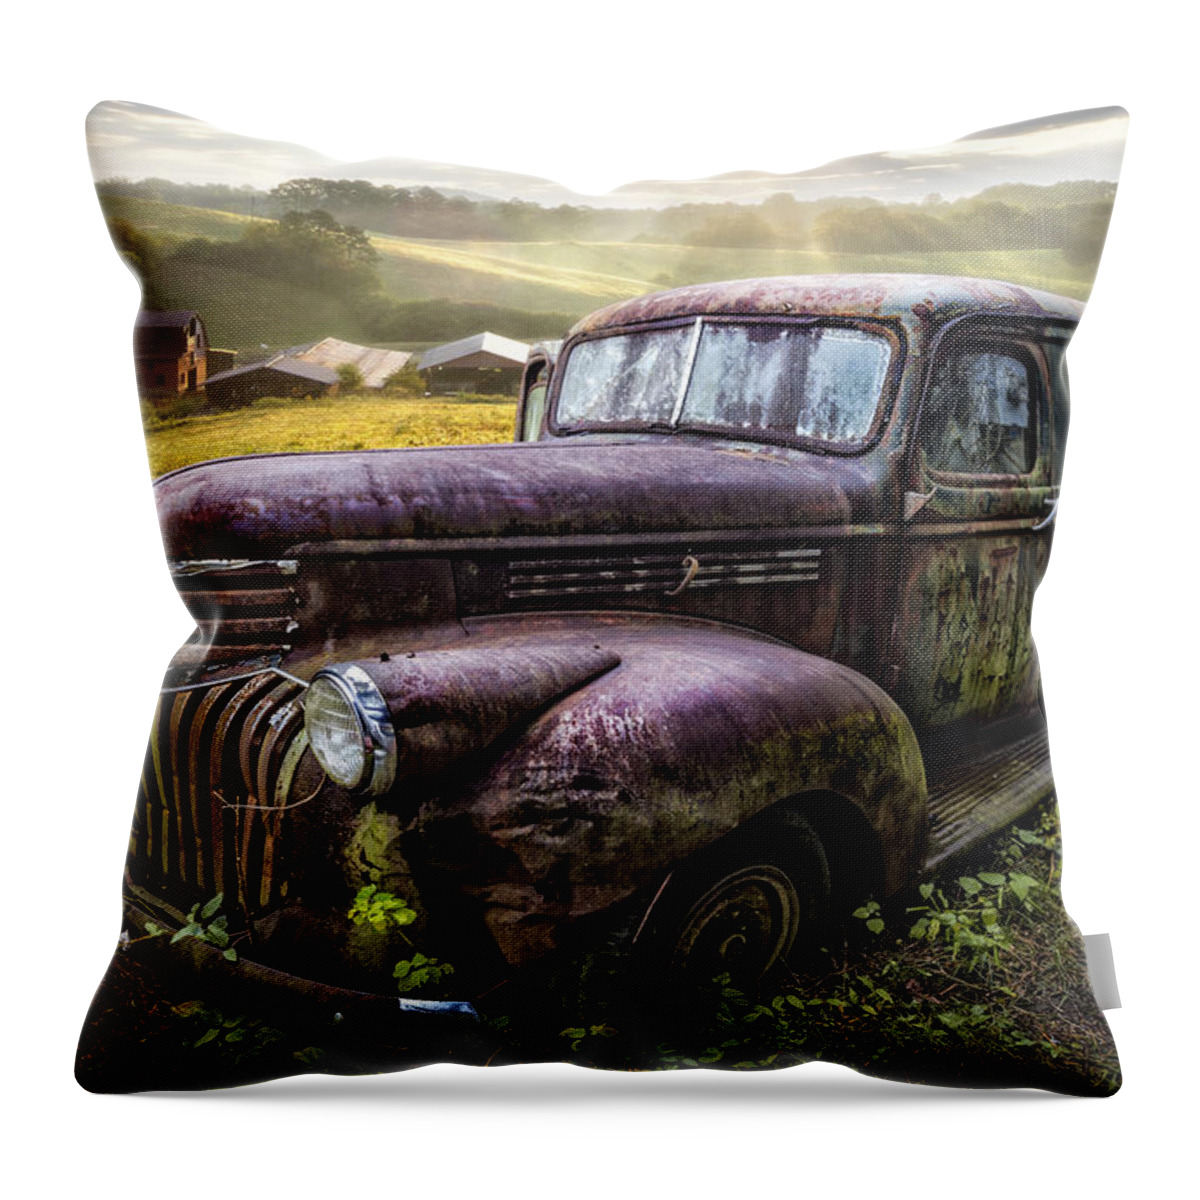 1930s Throw Pillow featuring the photograph Old Dairy Farm Truck by Debra and Dave Vanderlaan